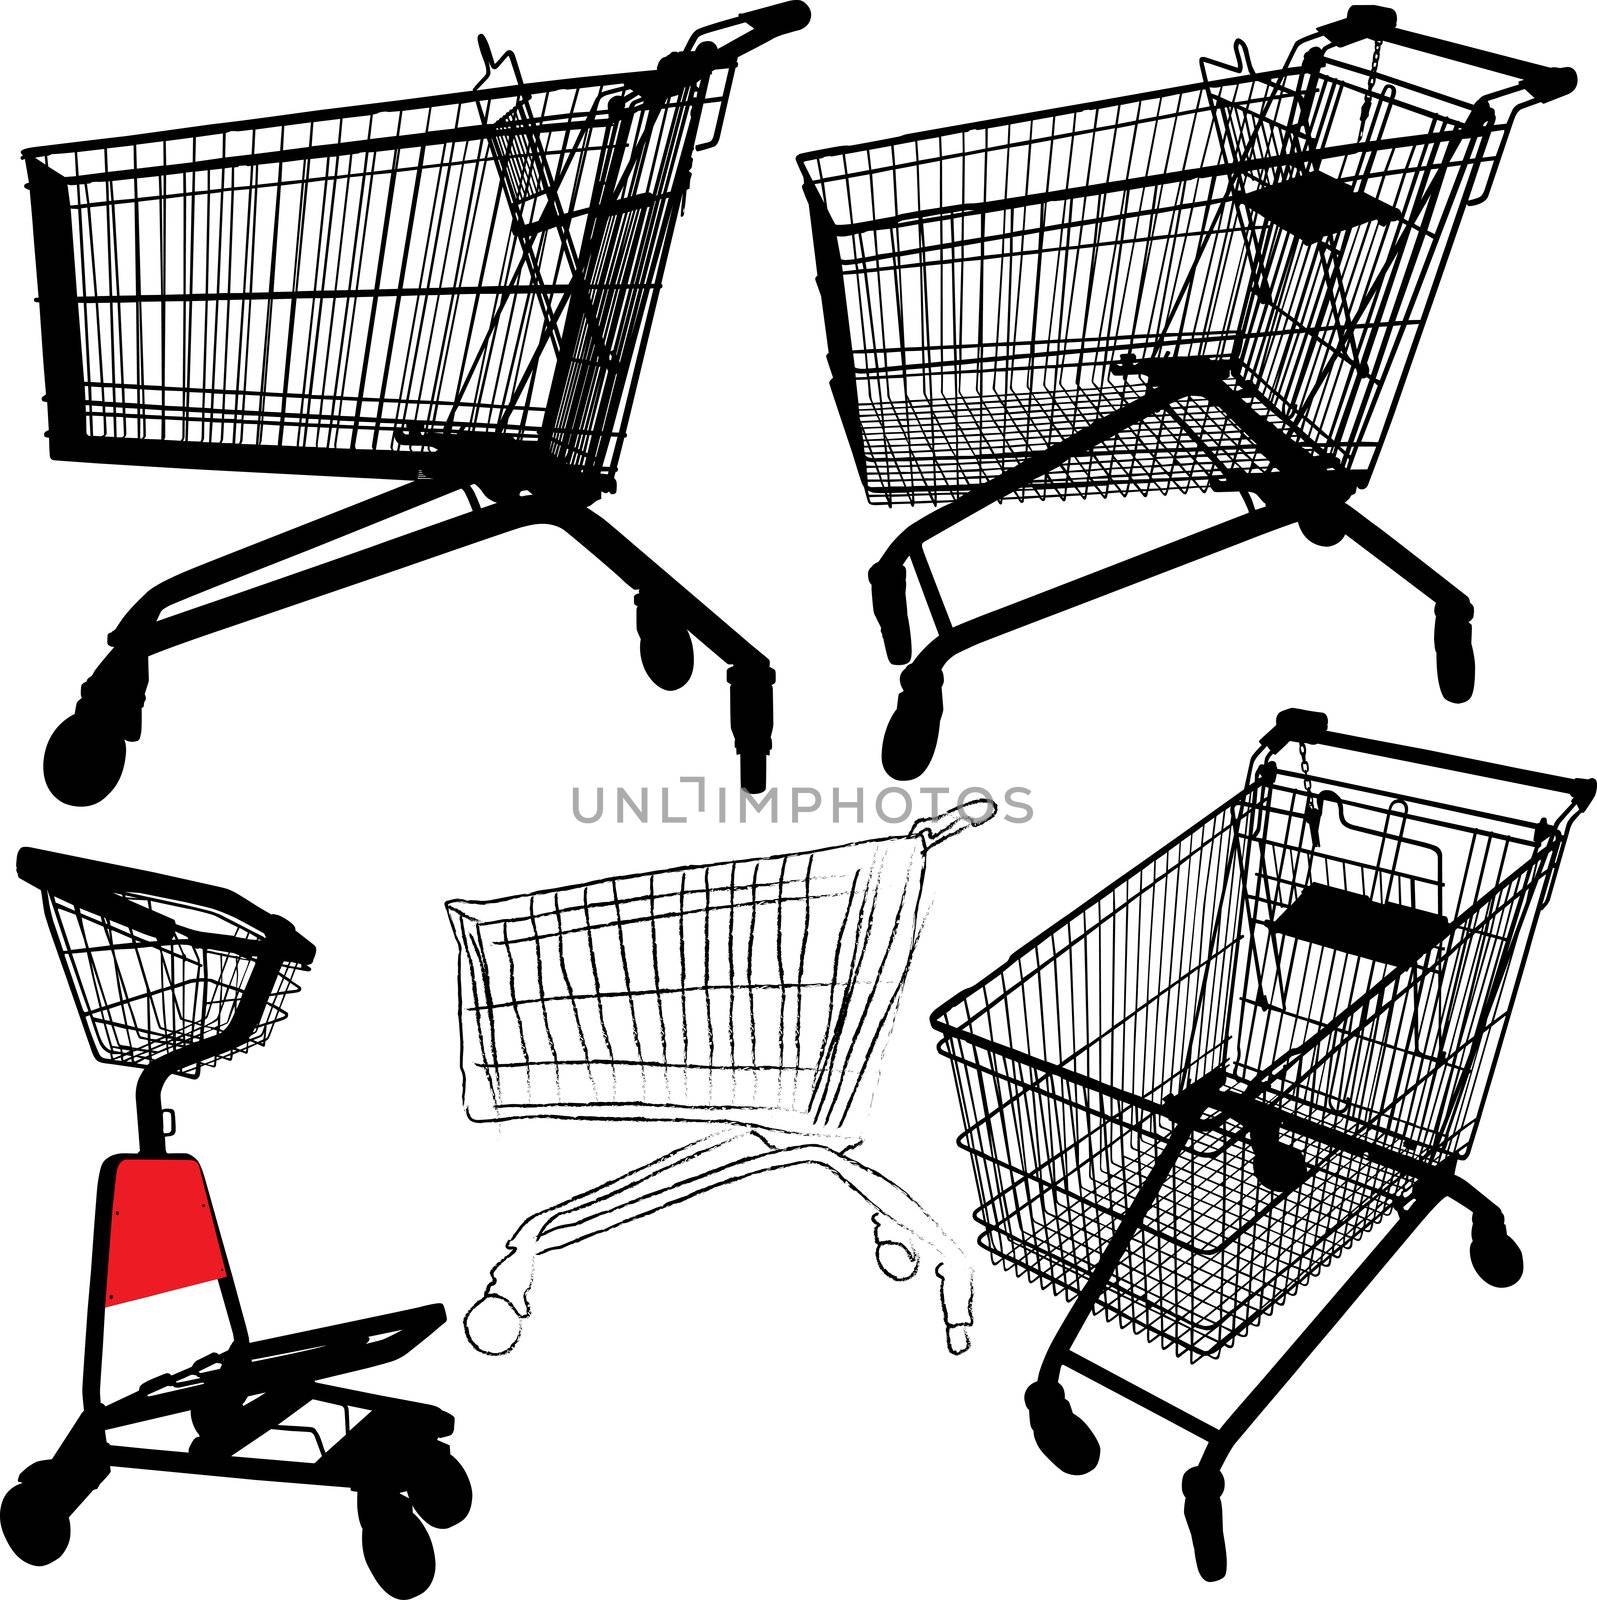 Shopping cart silhouettes by ints